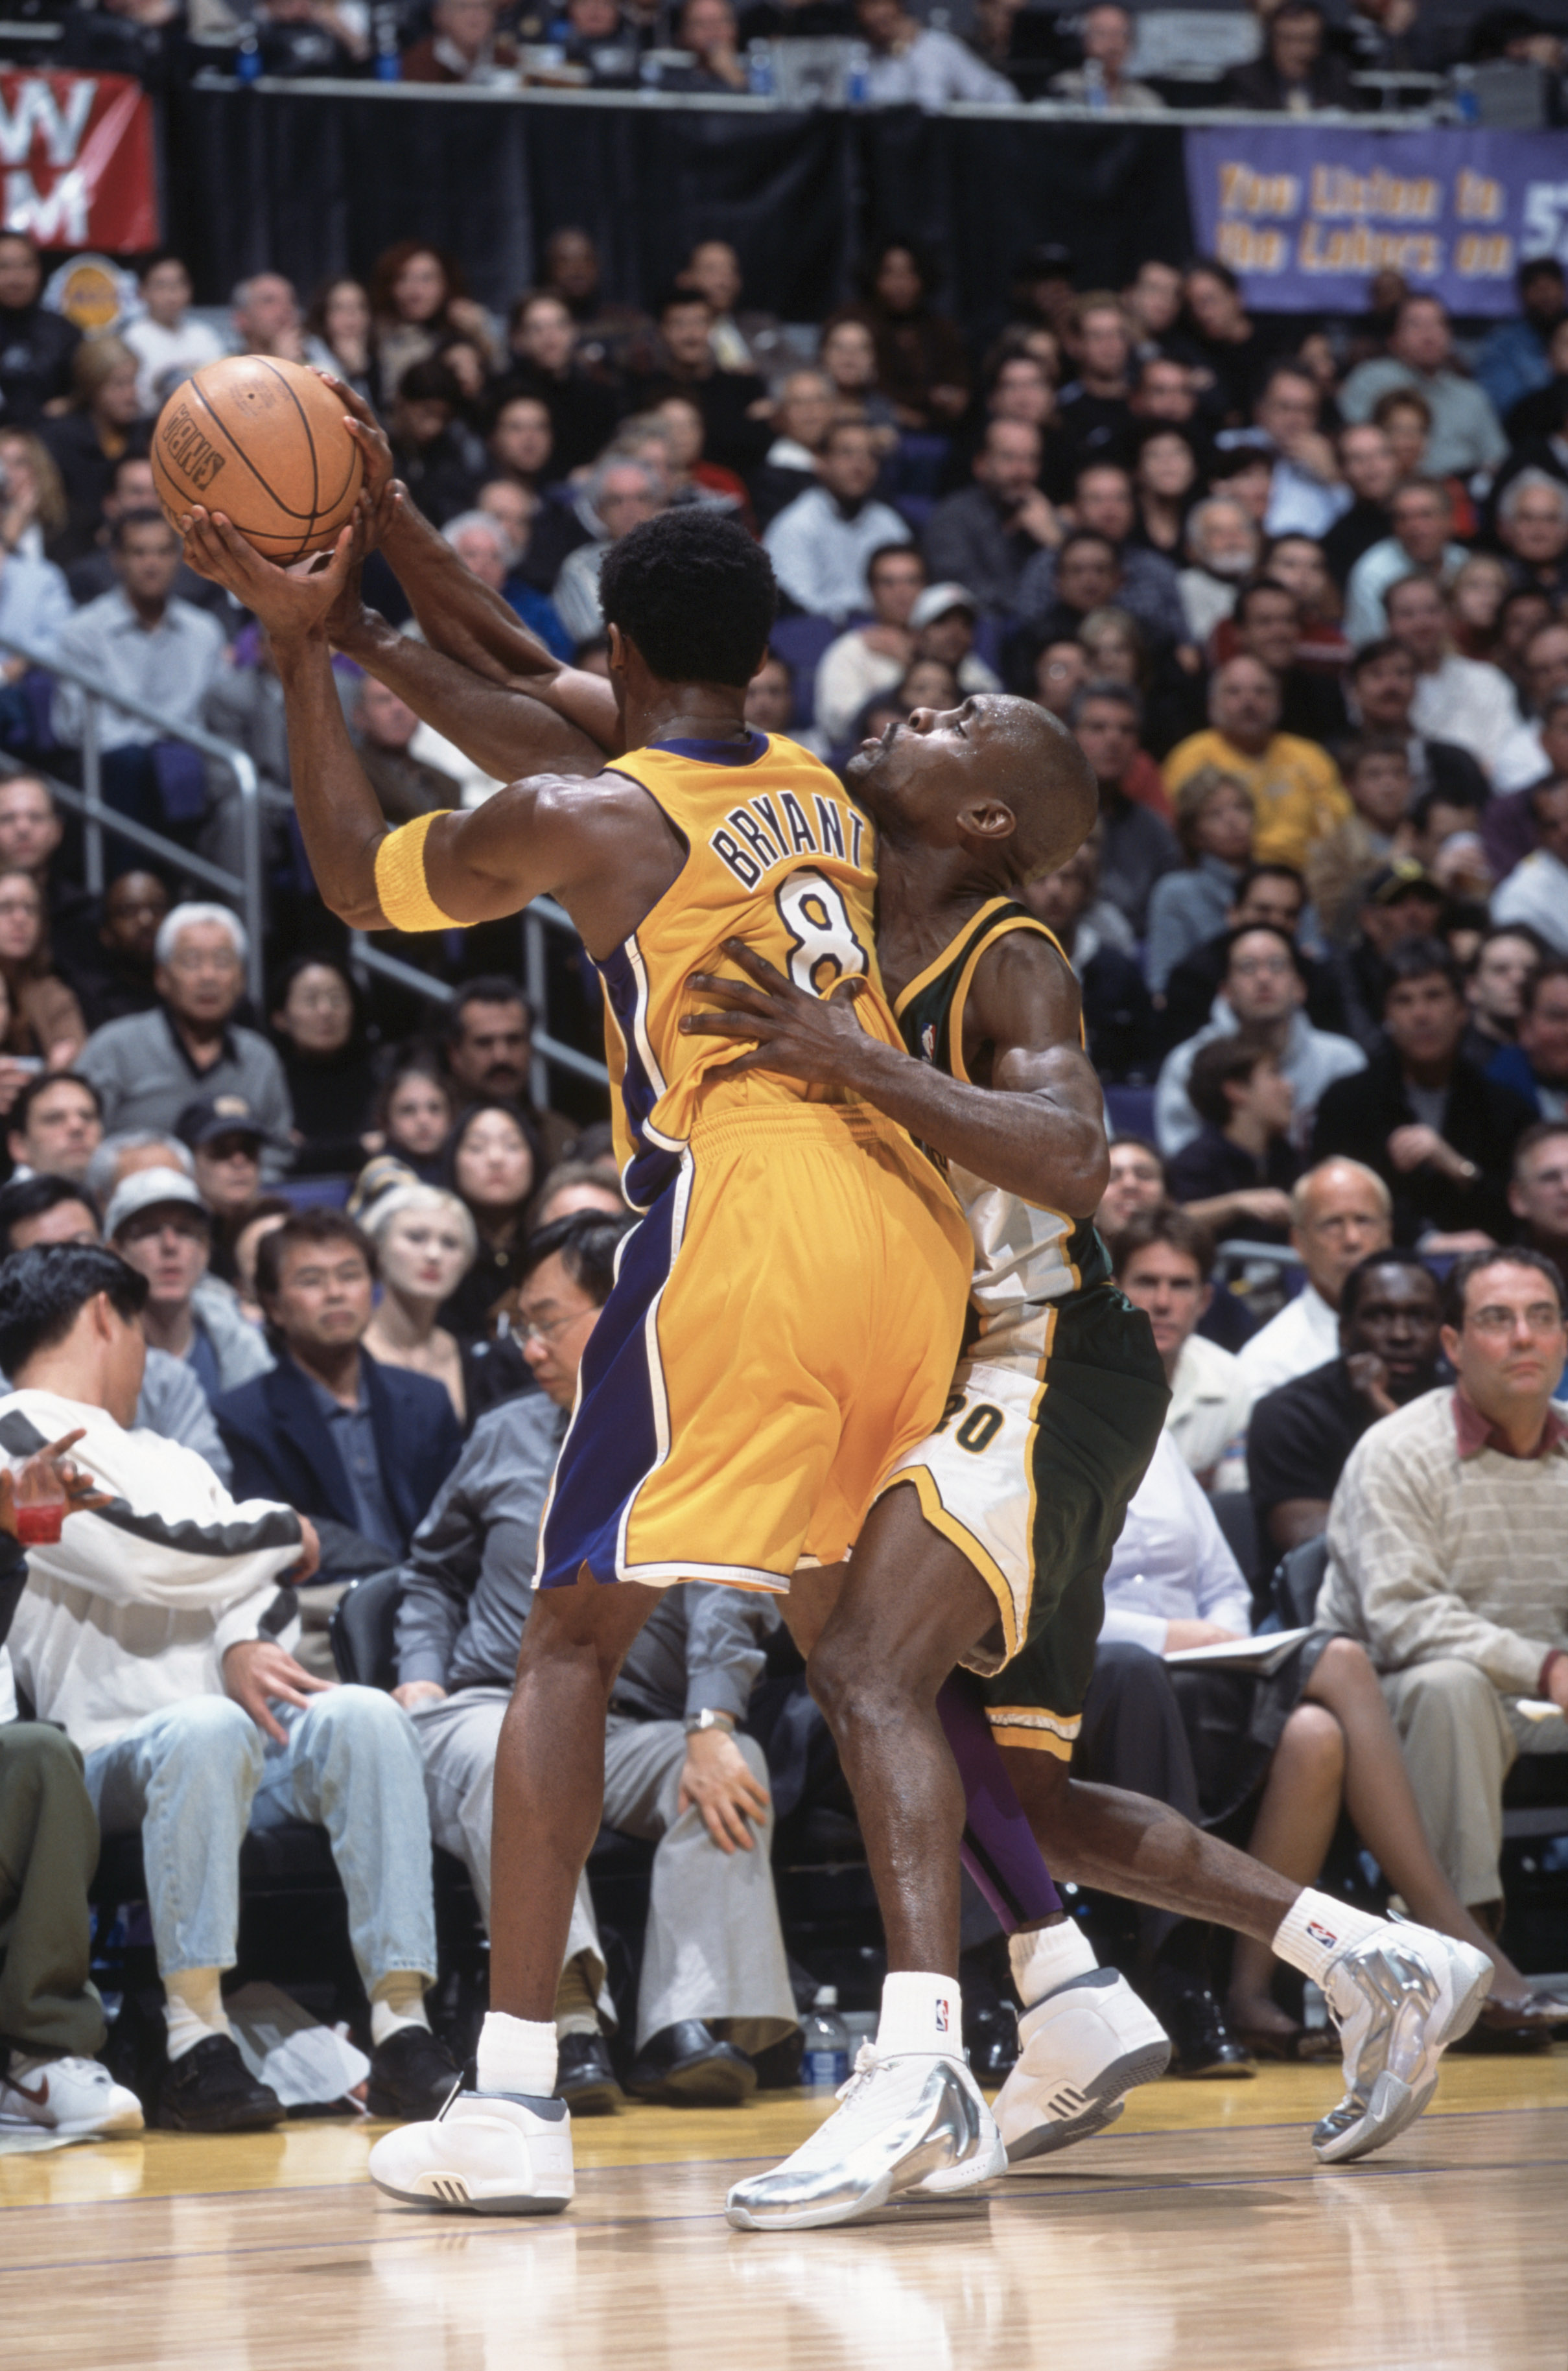 11 Dec 2001:  Point guard Gary Payton #20 of the Seattle SuperSonics guards Kobe Bryant #8 of the Los Angeles Lakers during the NBA game at the Staples Center in Los Angeles, California.  The SuperSonics defeated the Lakers 104-93.Mandatory Credit: Jeff G